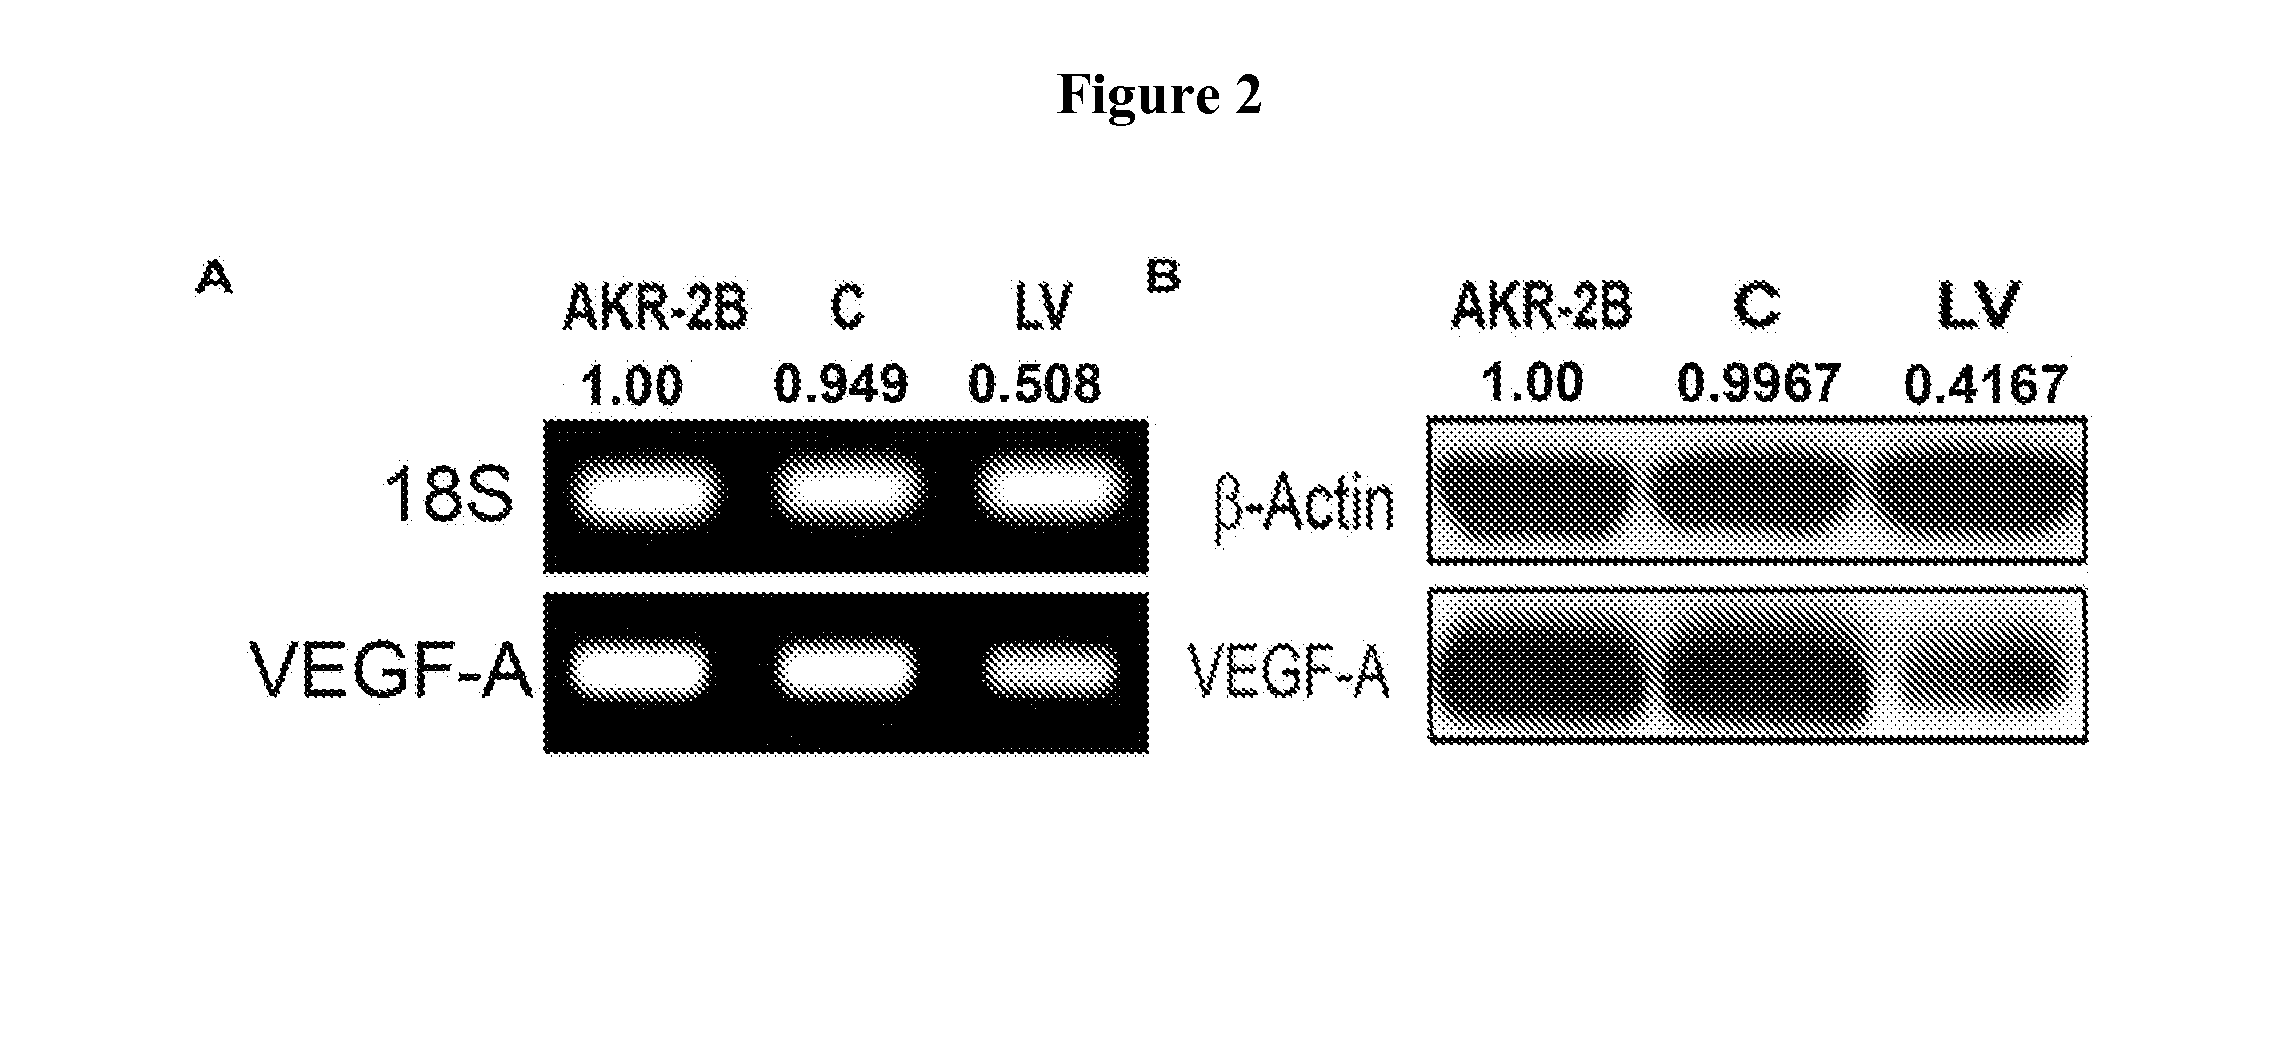 Methods and materials for reducing venous stenosis formation of an arteriovenous fistula or graft